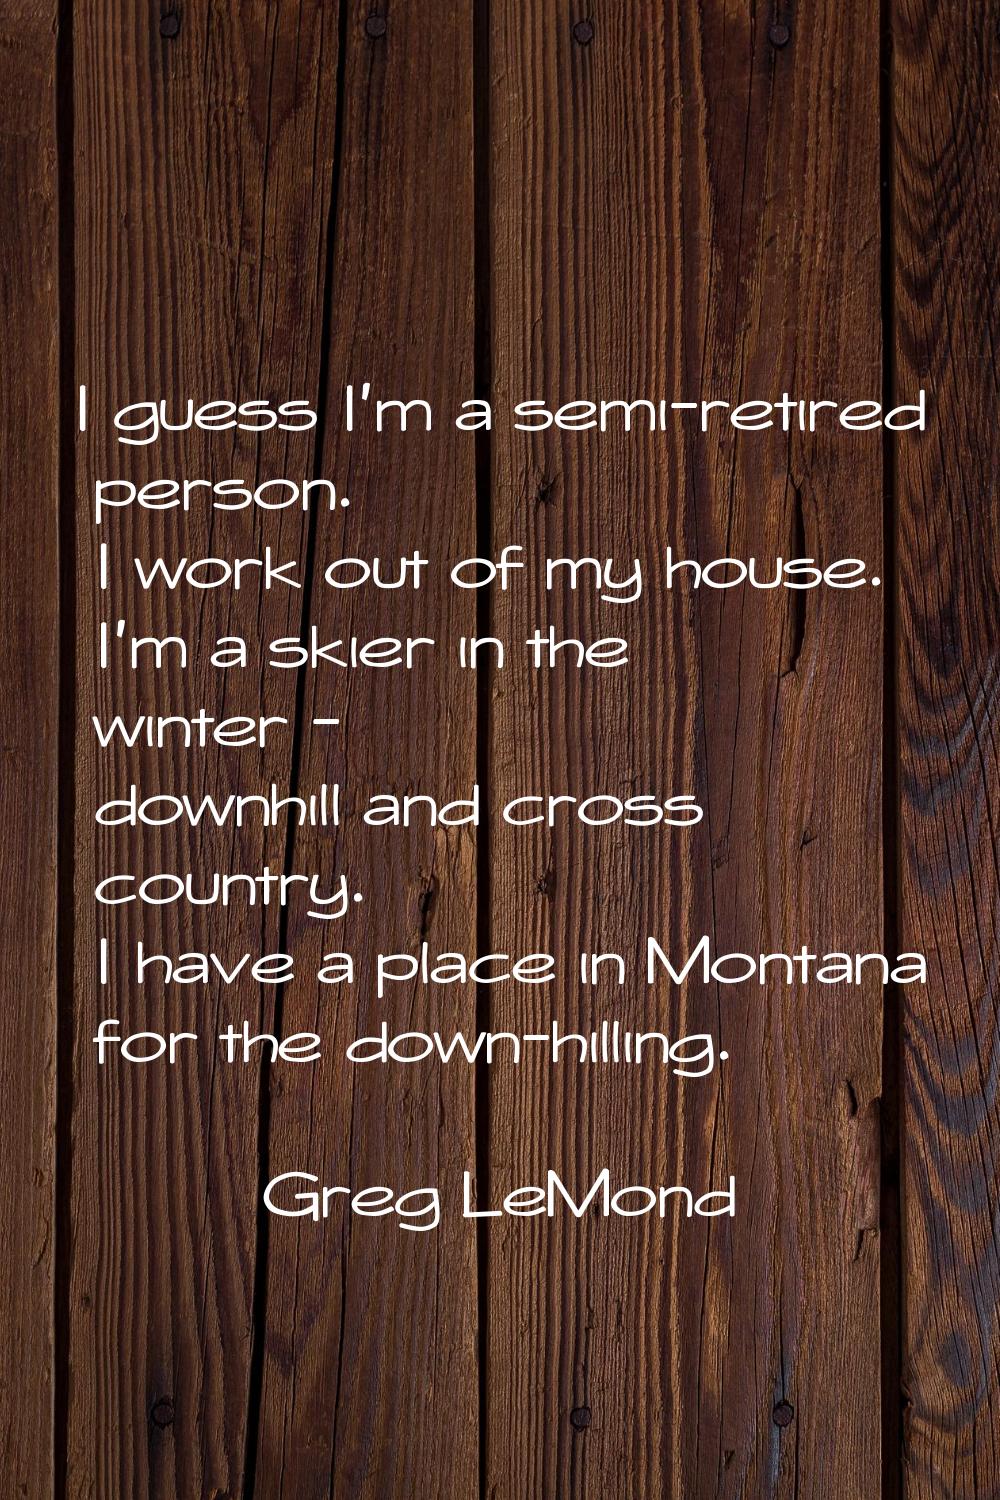 I guess I'm a semi-retired person. I work out of my house. I'm a skier in the winter - downhill and